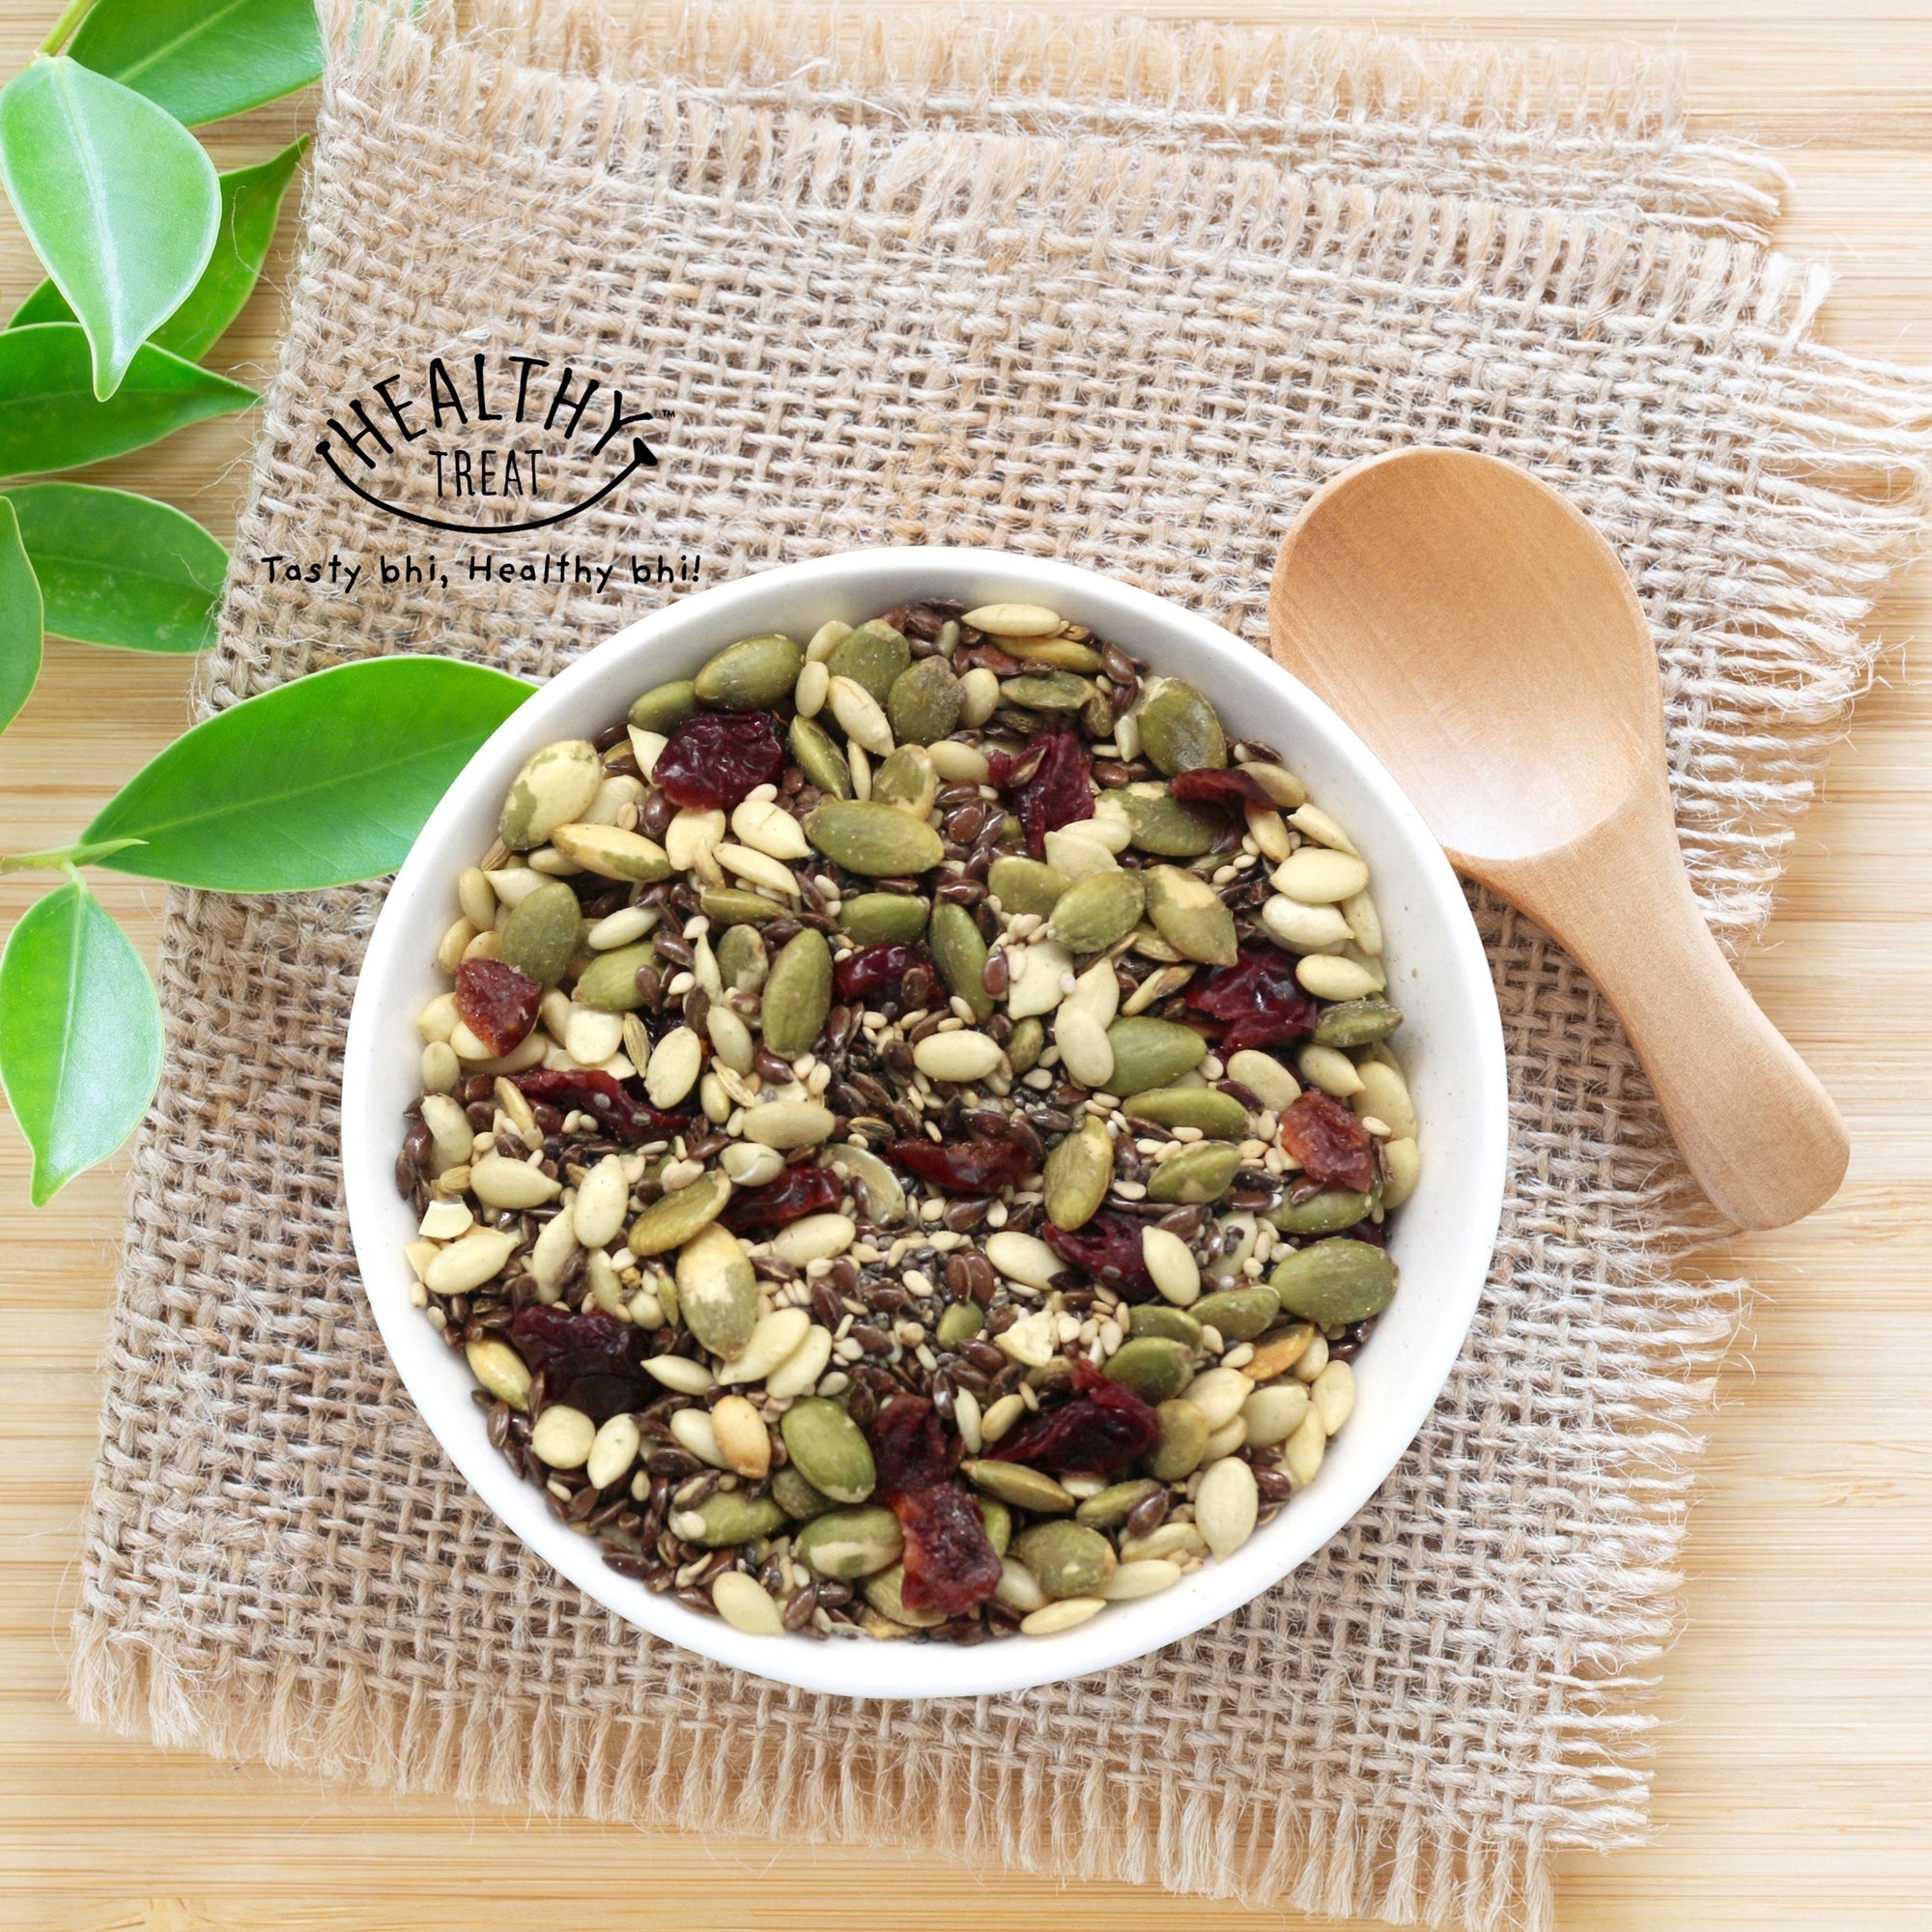 Healthy Treat Roasted 5 in 1 Superseed mix or mixed seeds classic with cranberries is protein rich and rich in antioxidants. It's a blend of roasted watermelon seeds, flax seeds, sesame seeds, chia seeds and pumpkin seeds and dried cranberries mix